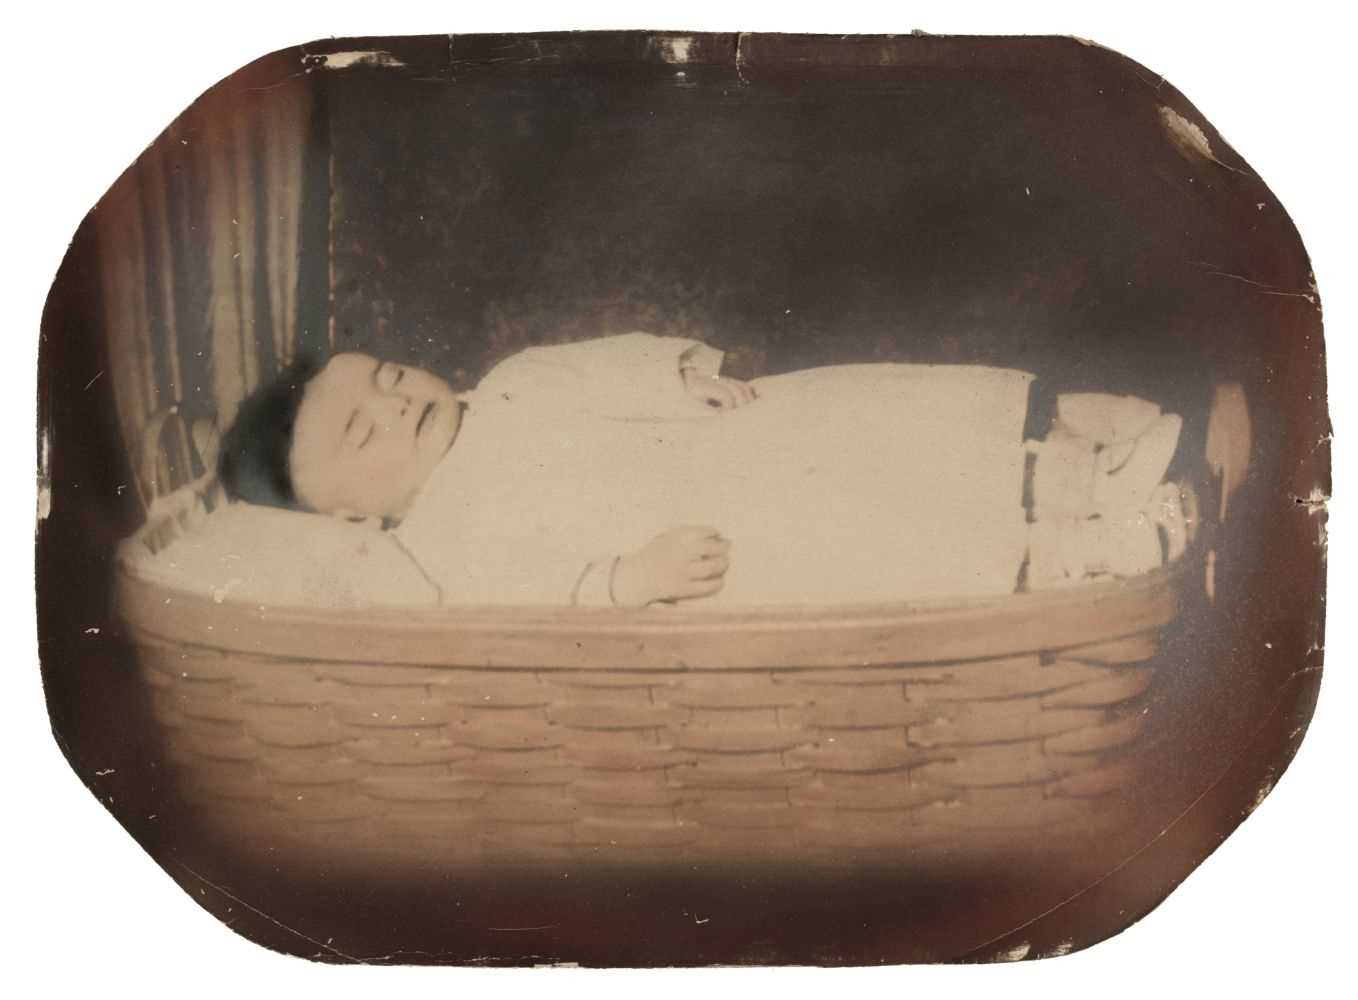 Lot 24 - Post-mortem of a child. A full-length portrait of a young child lying in a wicker basket, c. 1880s